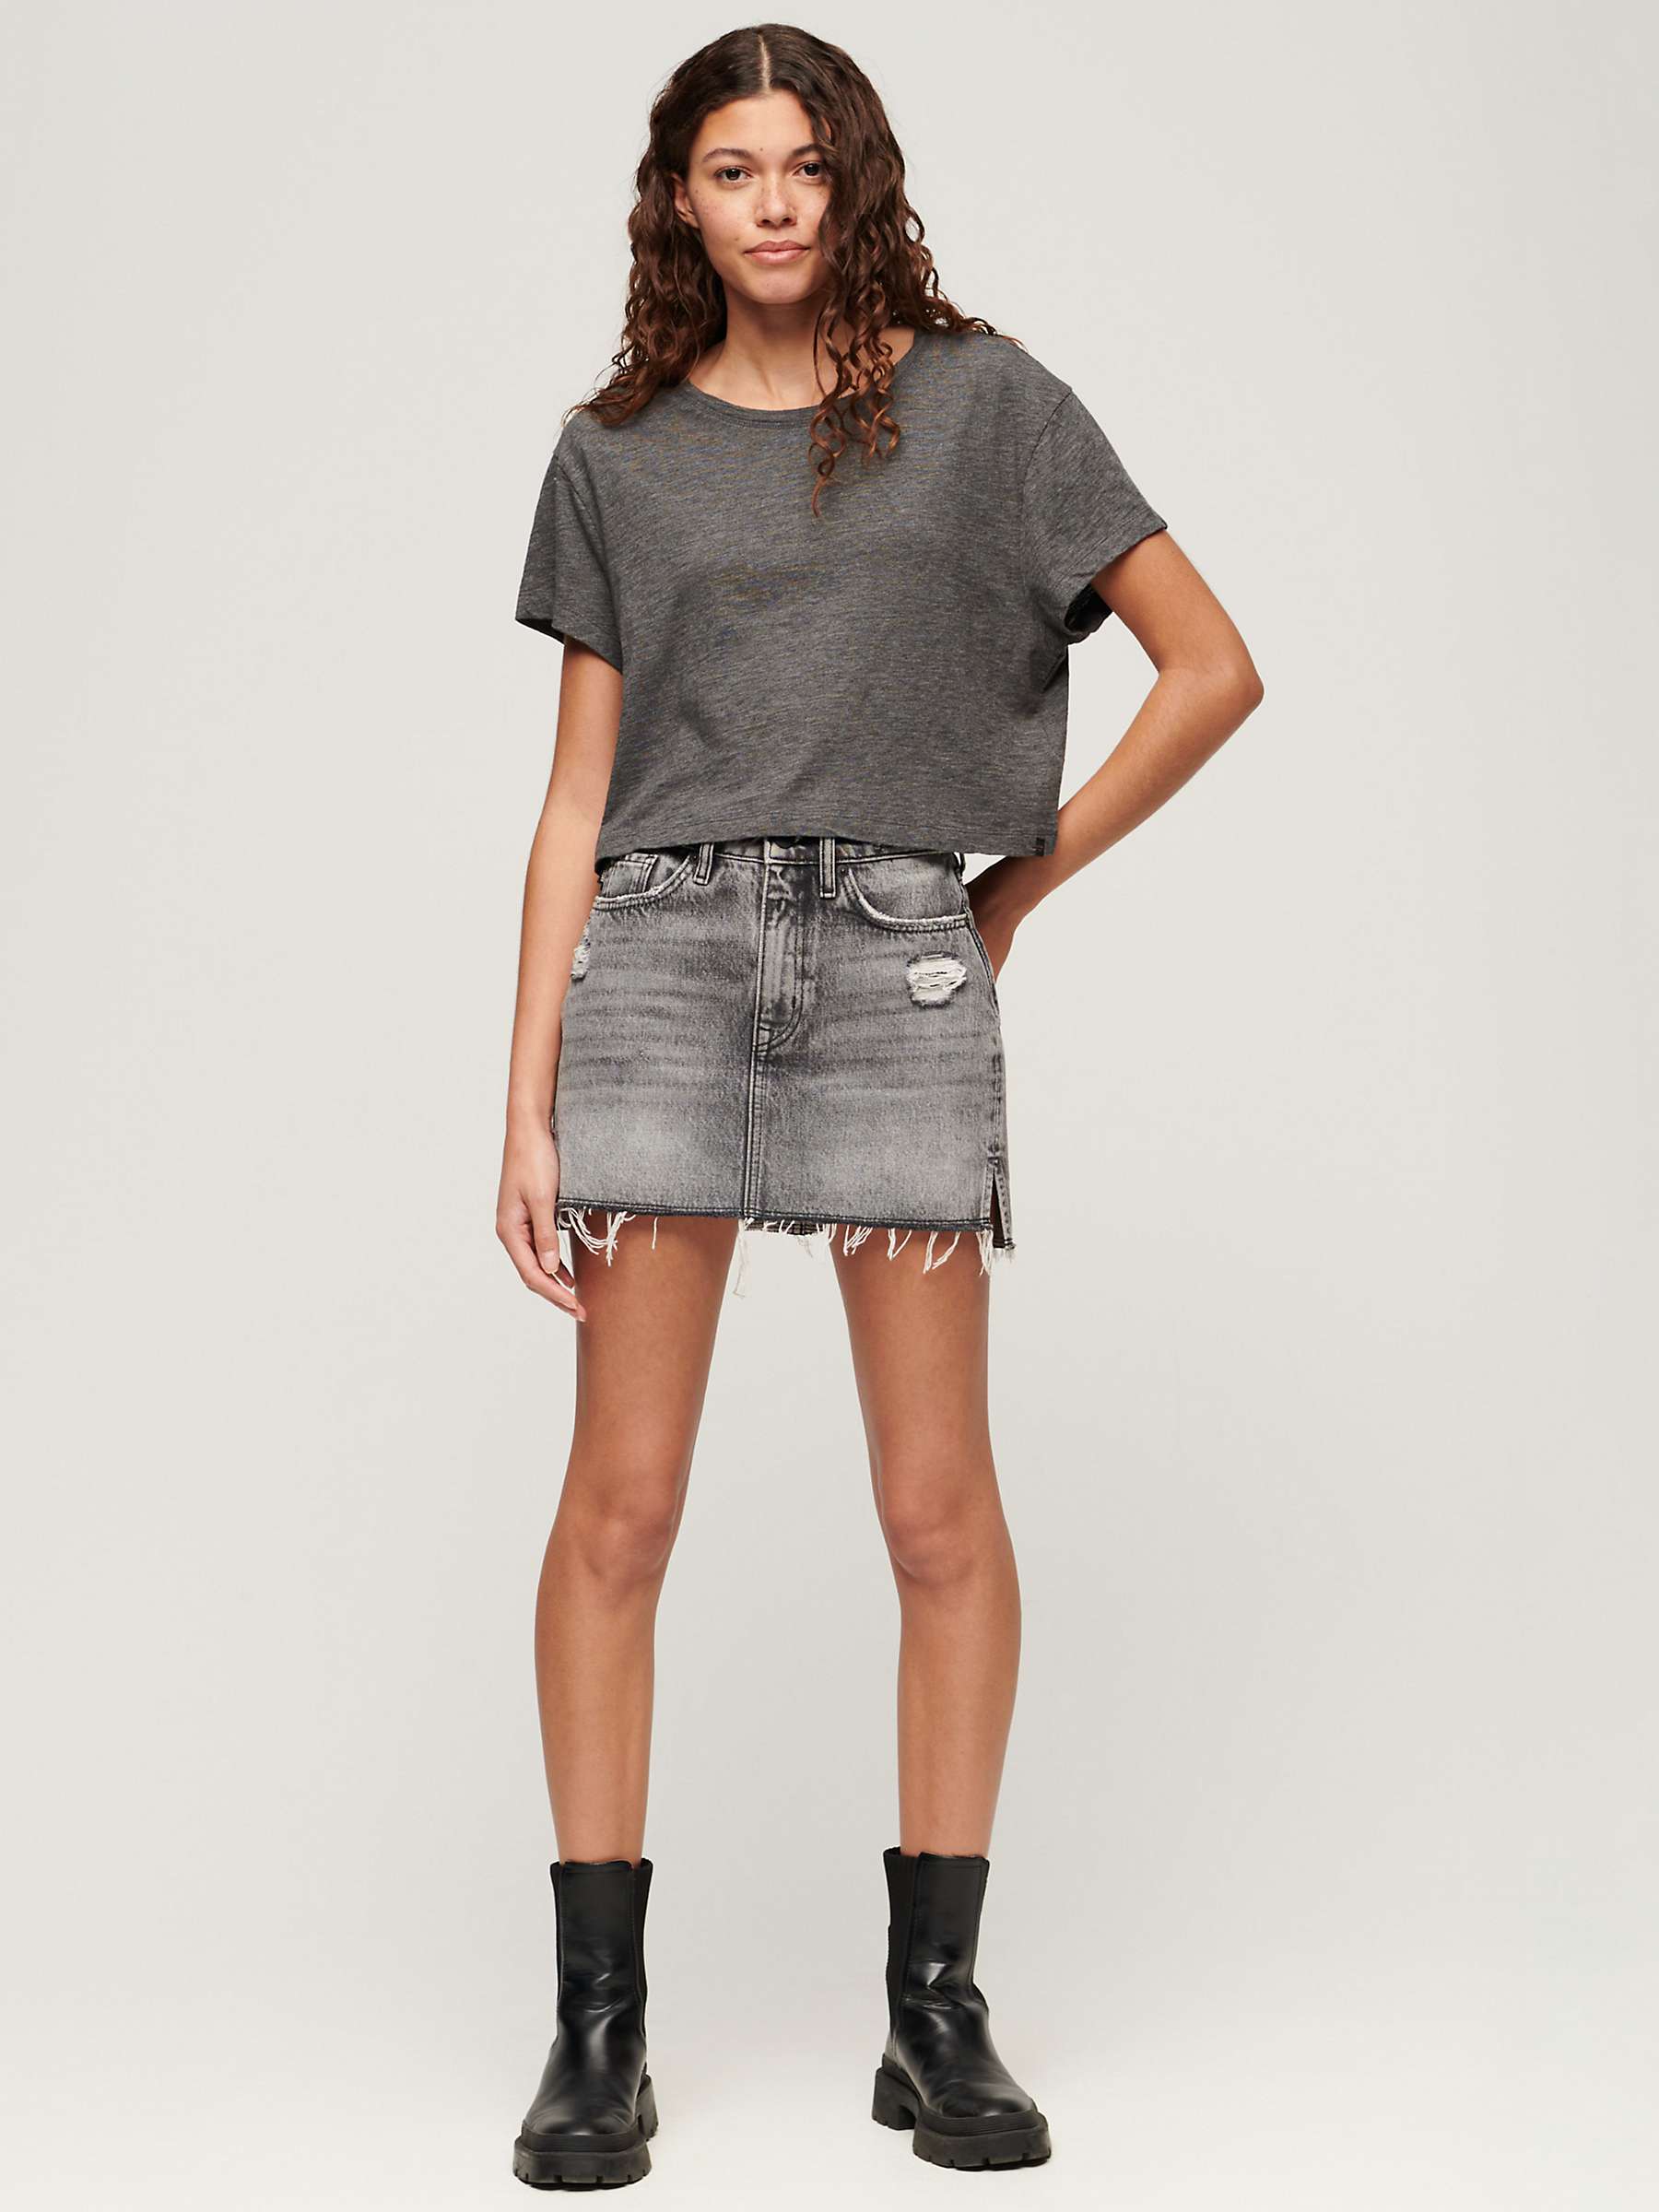 Buy Superdry Slouchy Cropped T-Shirt Online at johnlewis.com